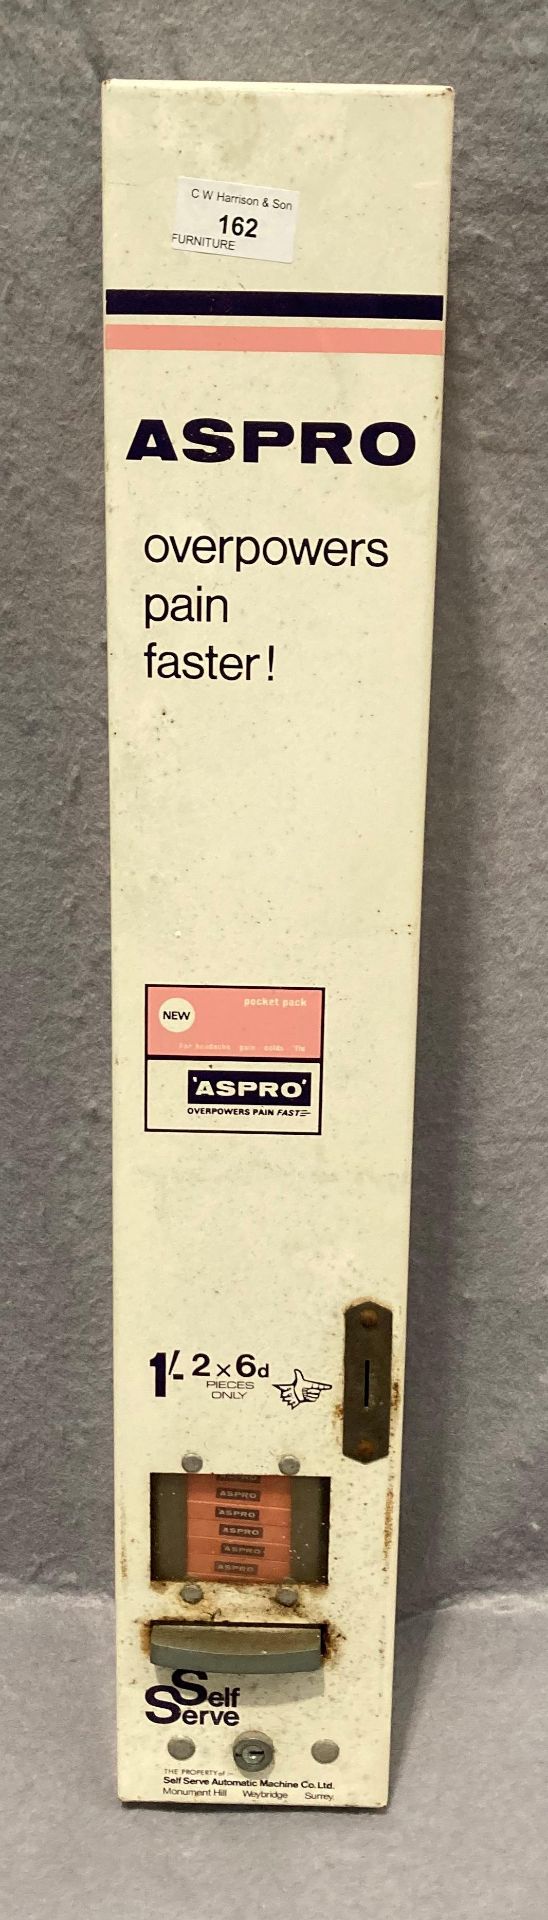 An Aspro self serve wall mounting coin operated white metal dispensing machine 10 x 11 x 64cm long